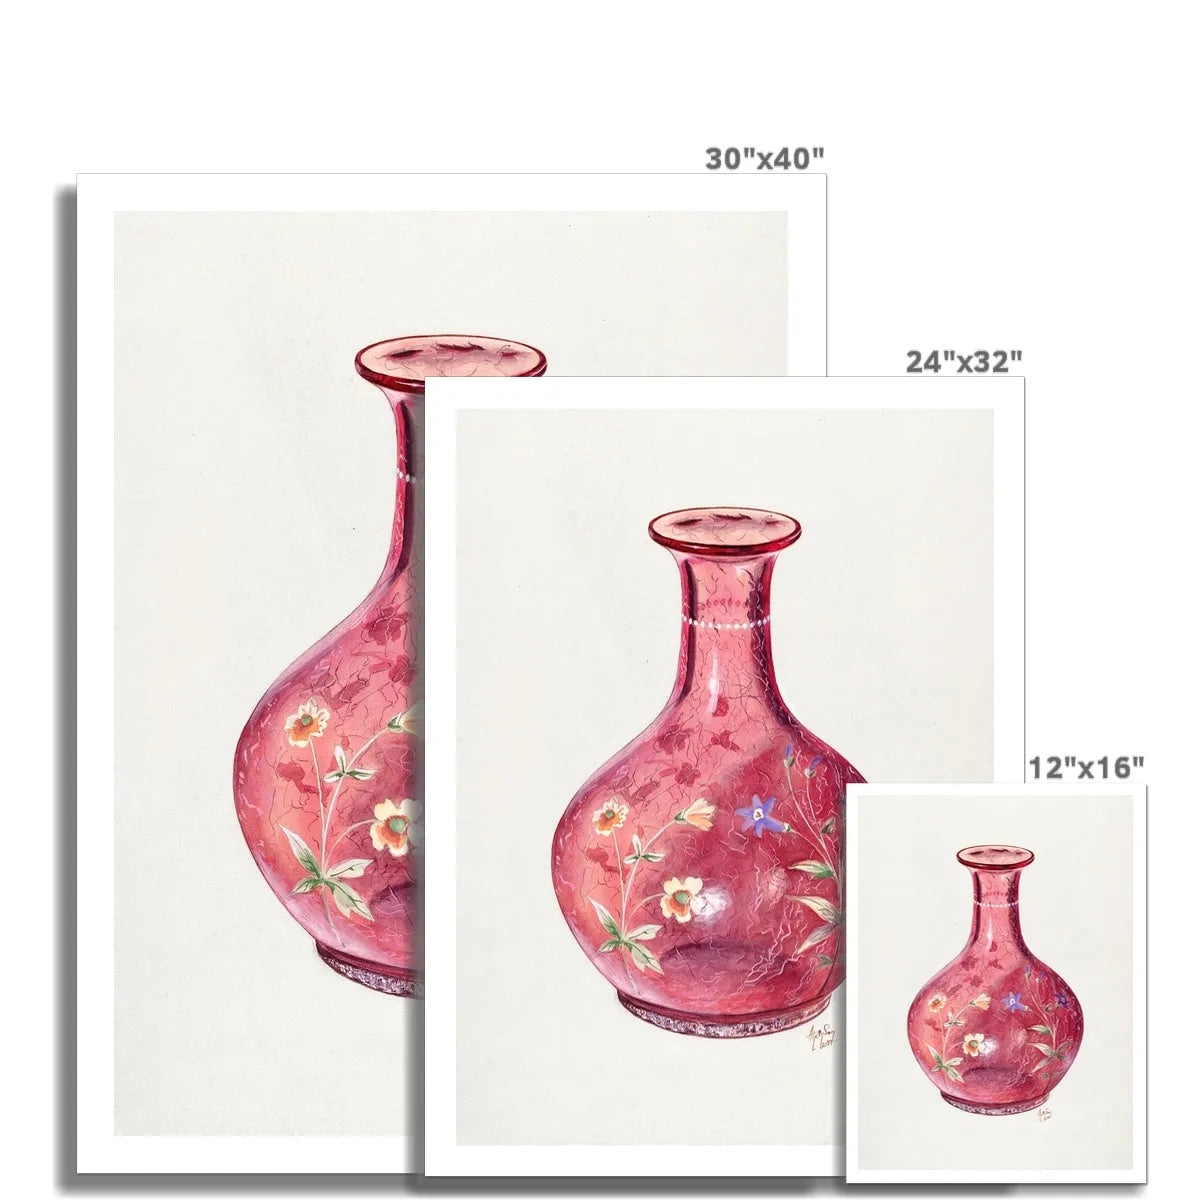 Hand Painted Carafe By Ralph Atkinson Fine Art Print - Posters Prints & Visual Artwork - Aesthetic Art